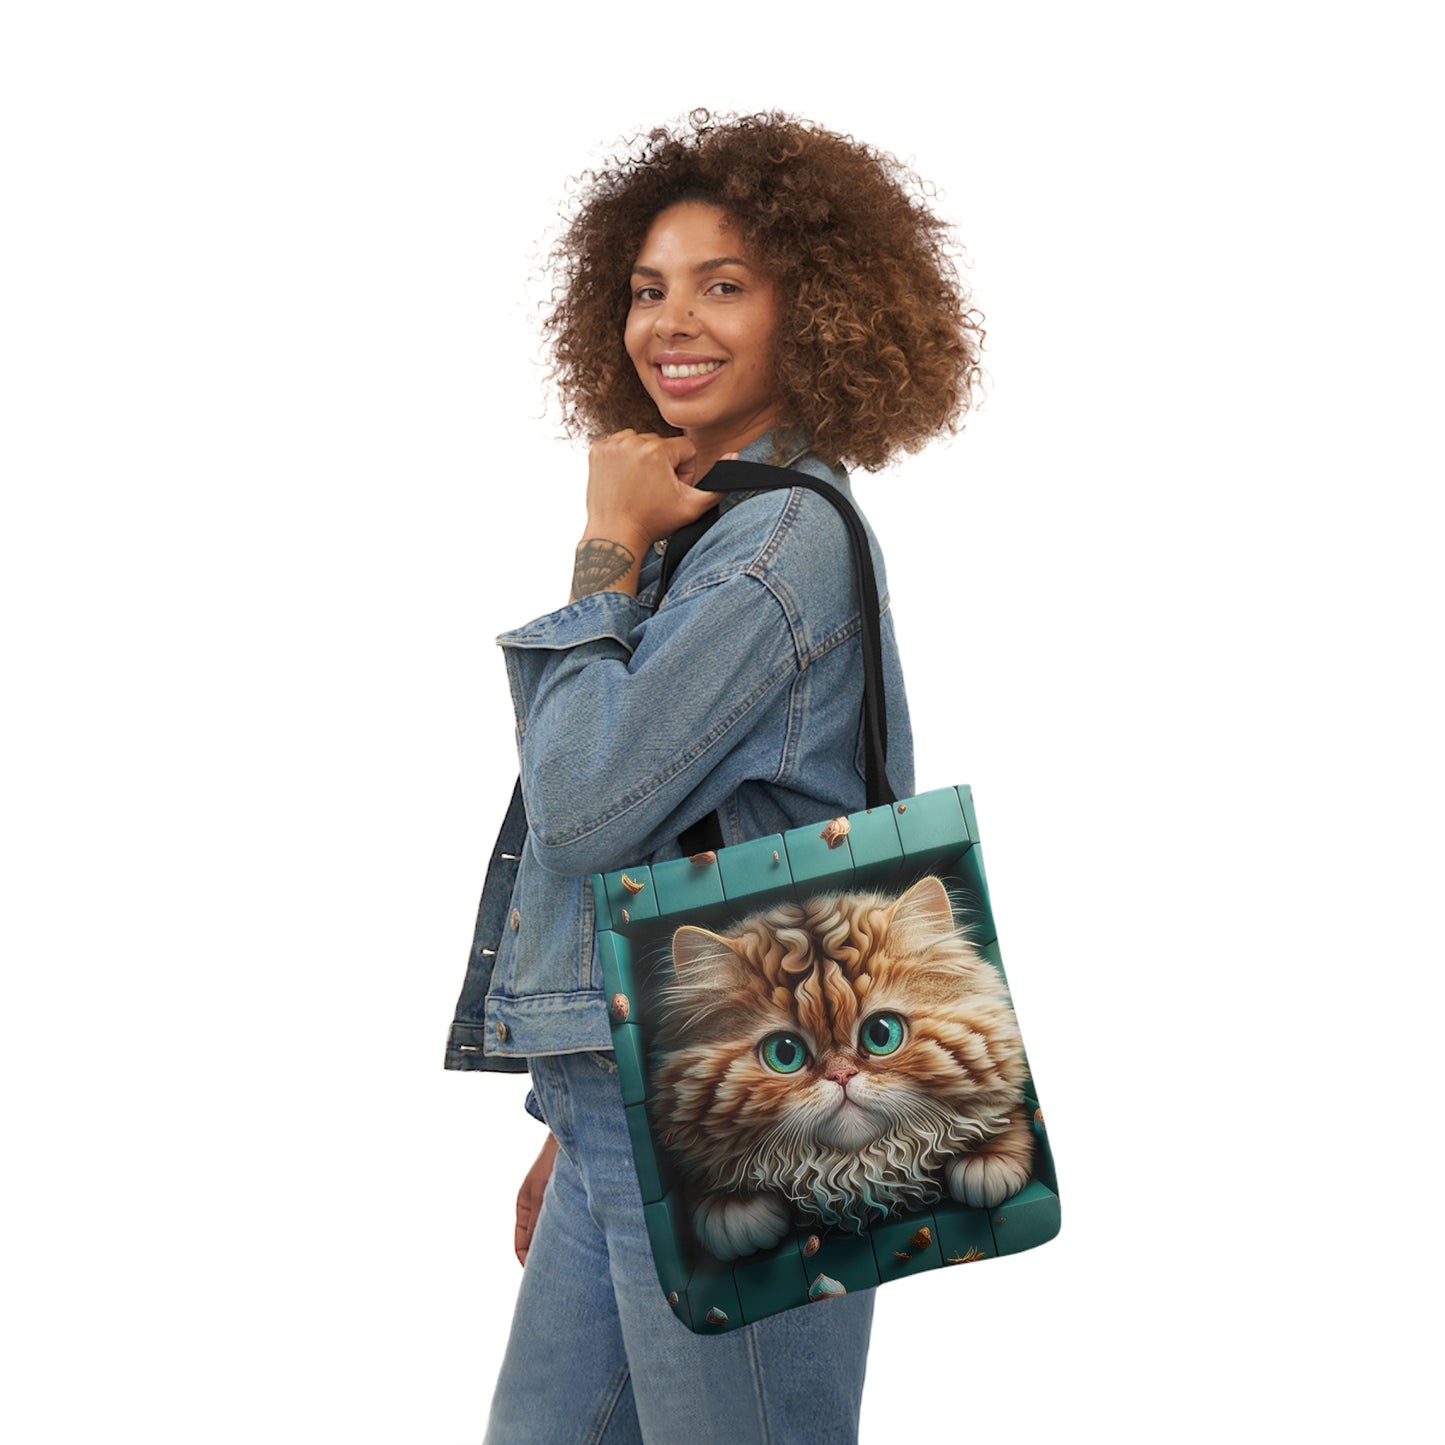 Beautiful Orange And White Fluffy Cat With Blue Eye , Blue Framed Polyester Canvas Tote Bag (AOP)